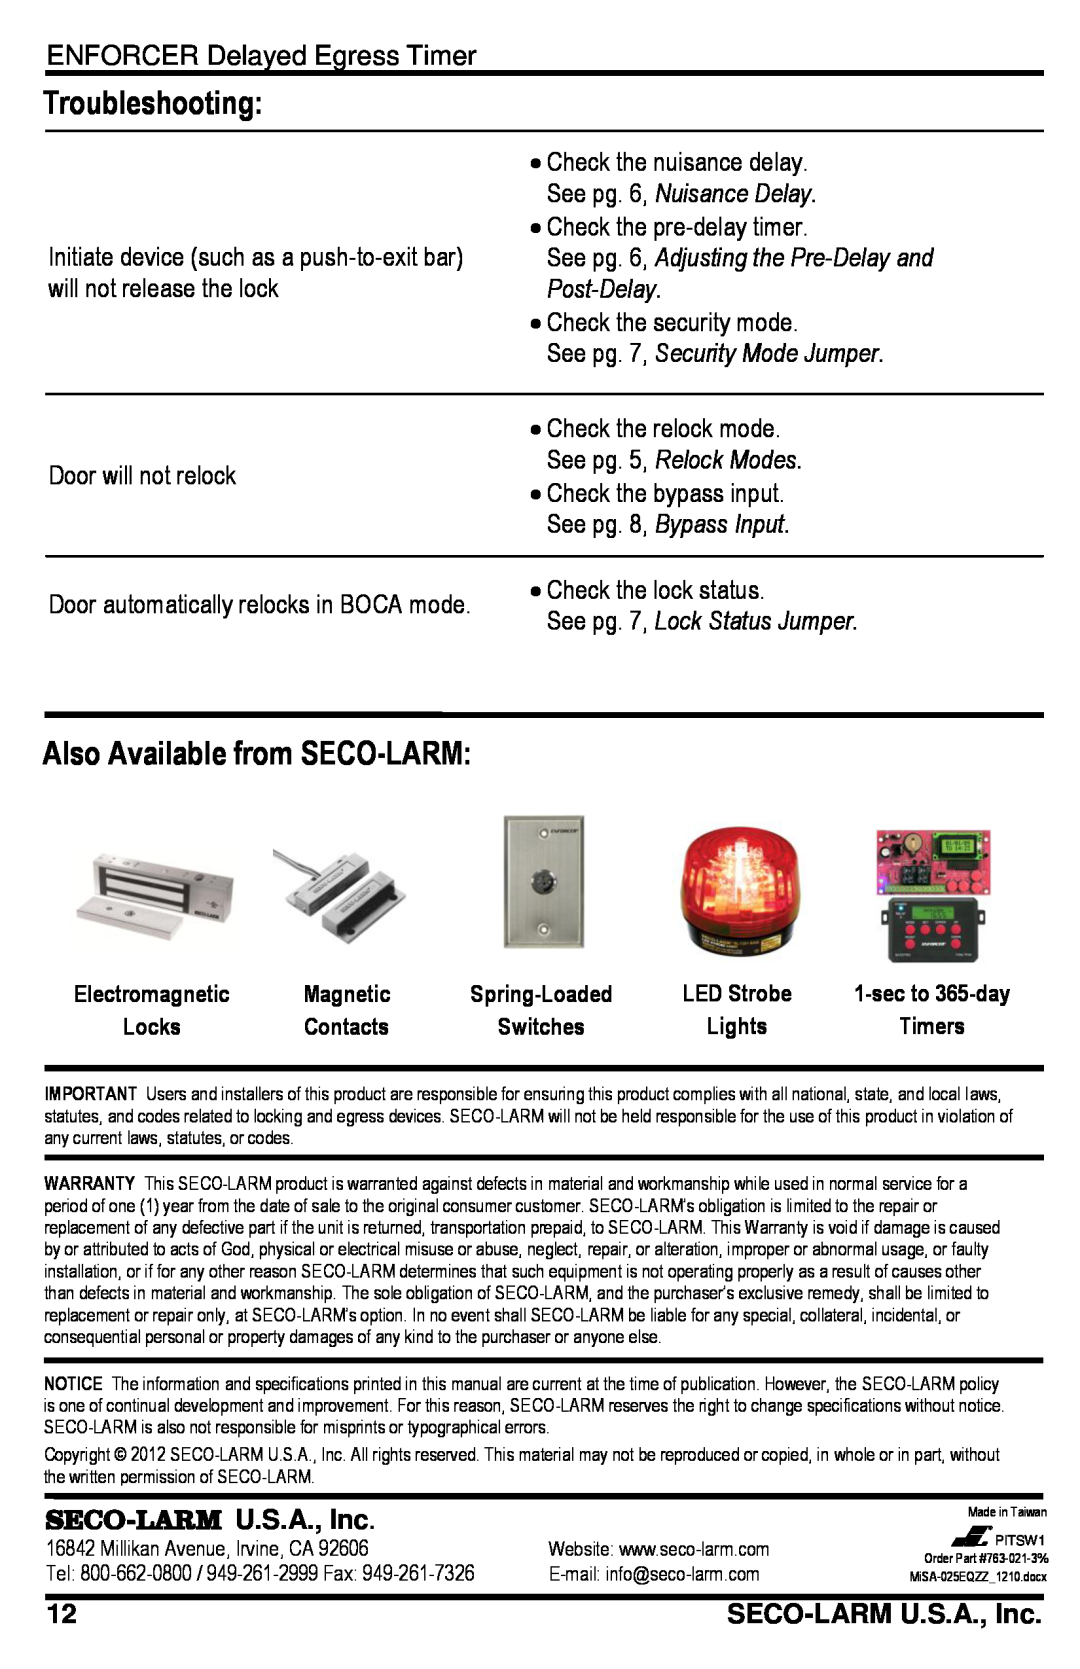 SECO-LARM USA SA-025EQ Troubleshooting, Also Available from SECO-LARM, See pg. 6, Adjusting the Pre-Delayand Post-Delay 